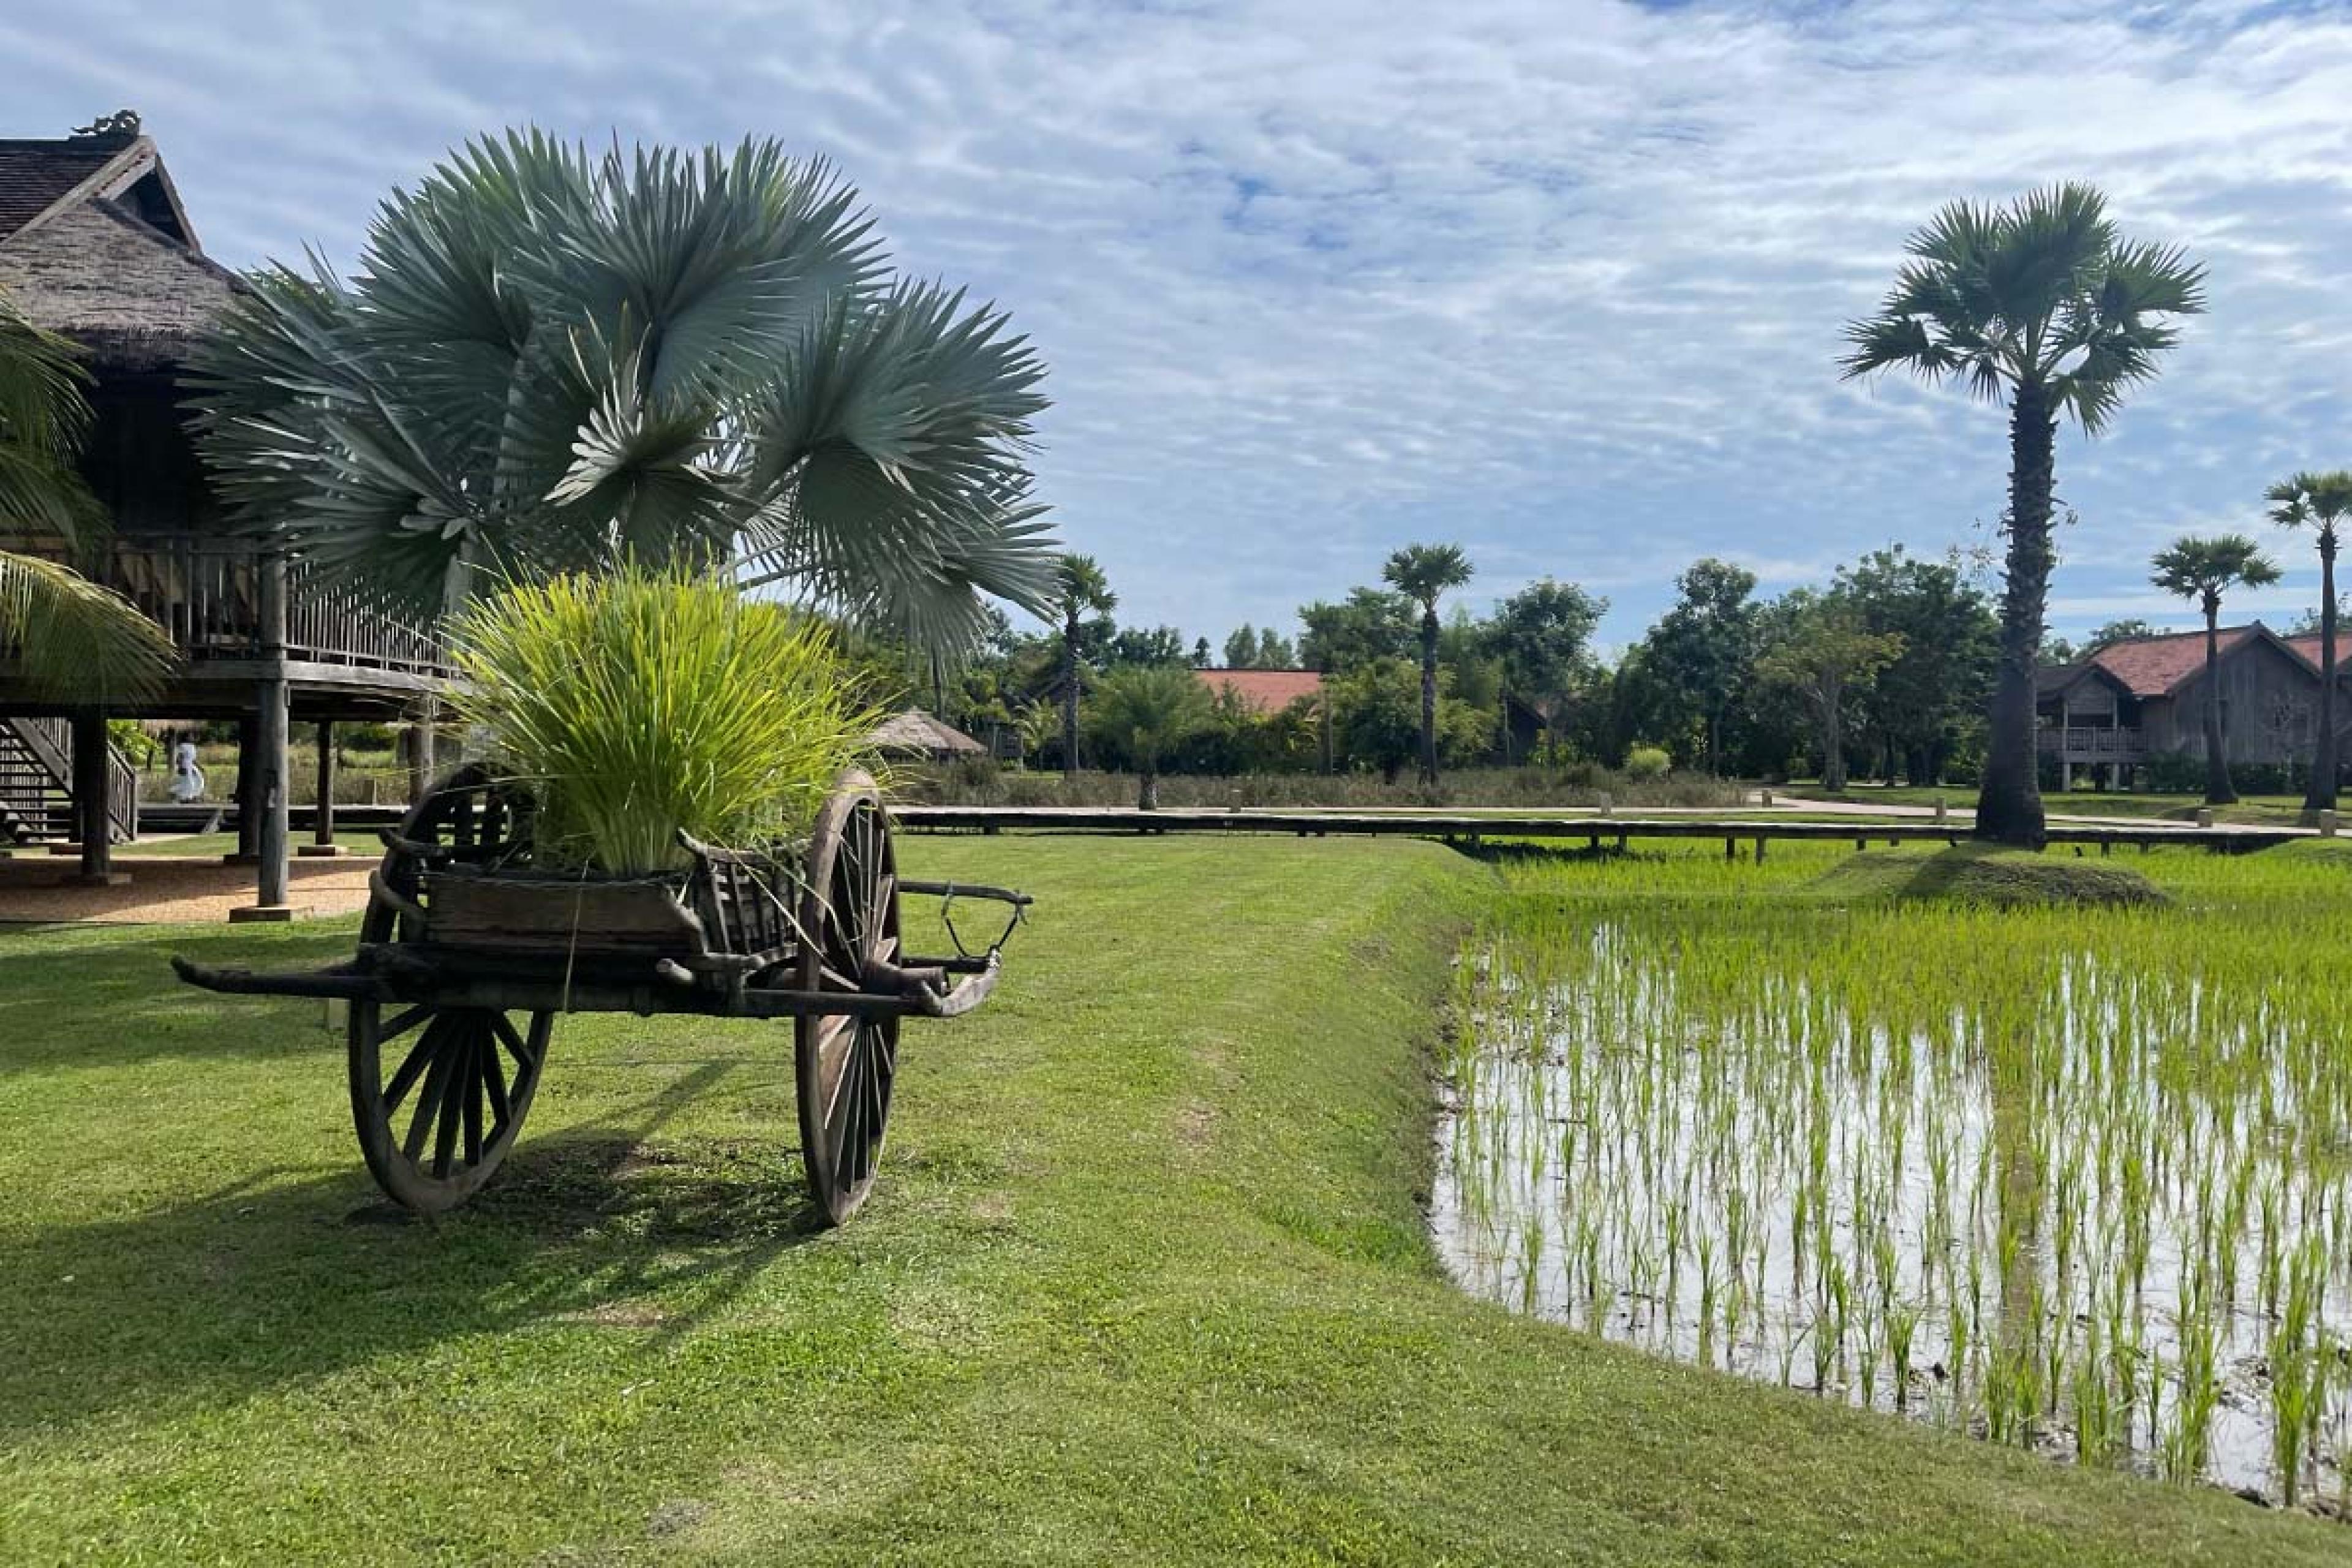 rice paddies with a wagon full of greenery